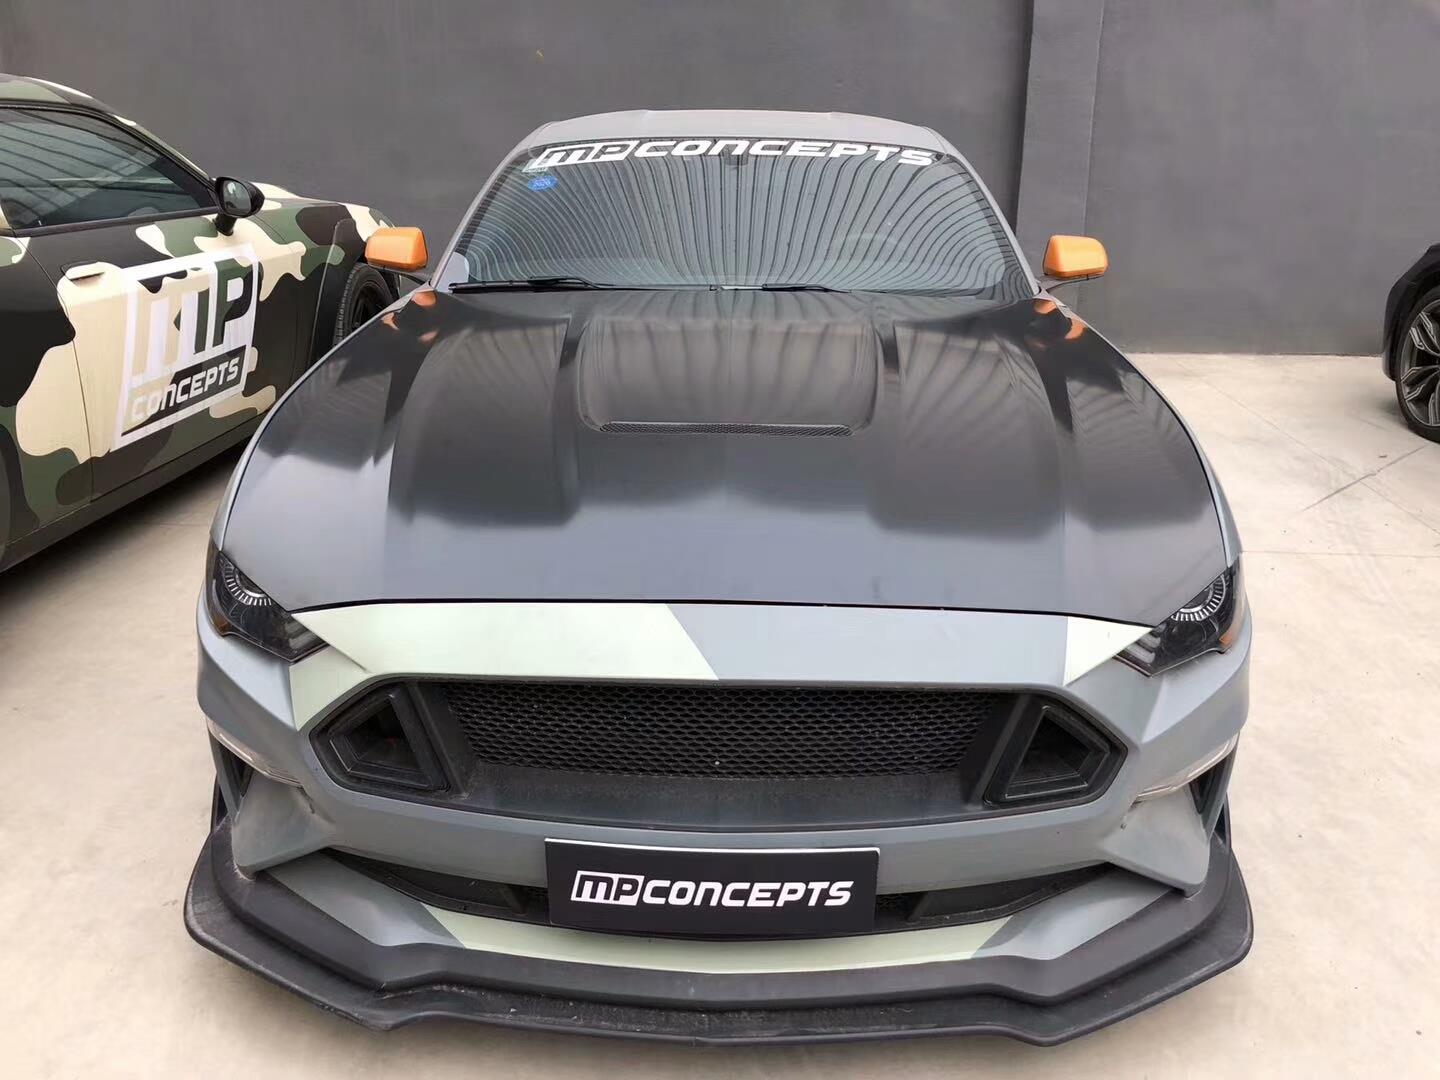 Buy MP Concepts Aluminium bonnet / hood for Ford Mustang. GT350 style